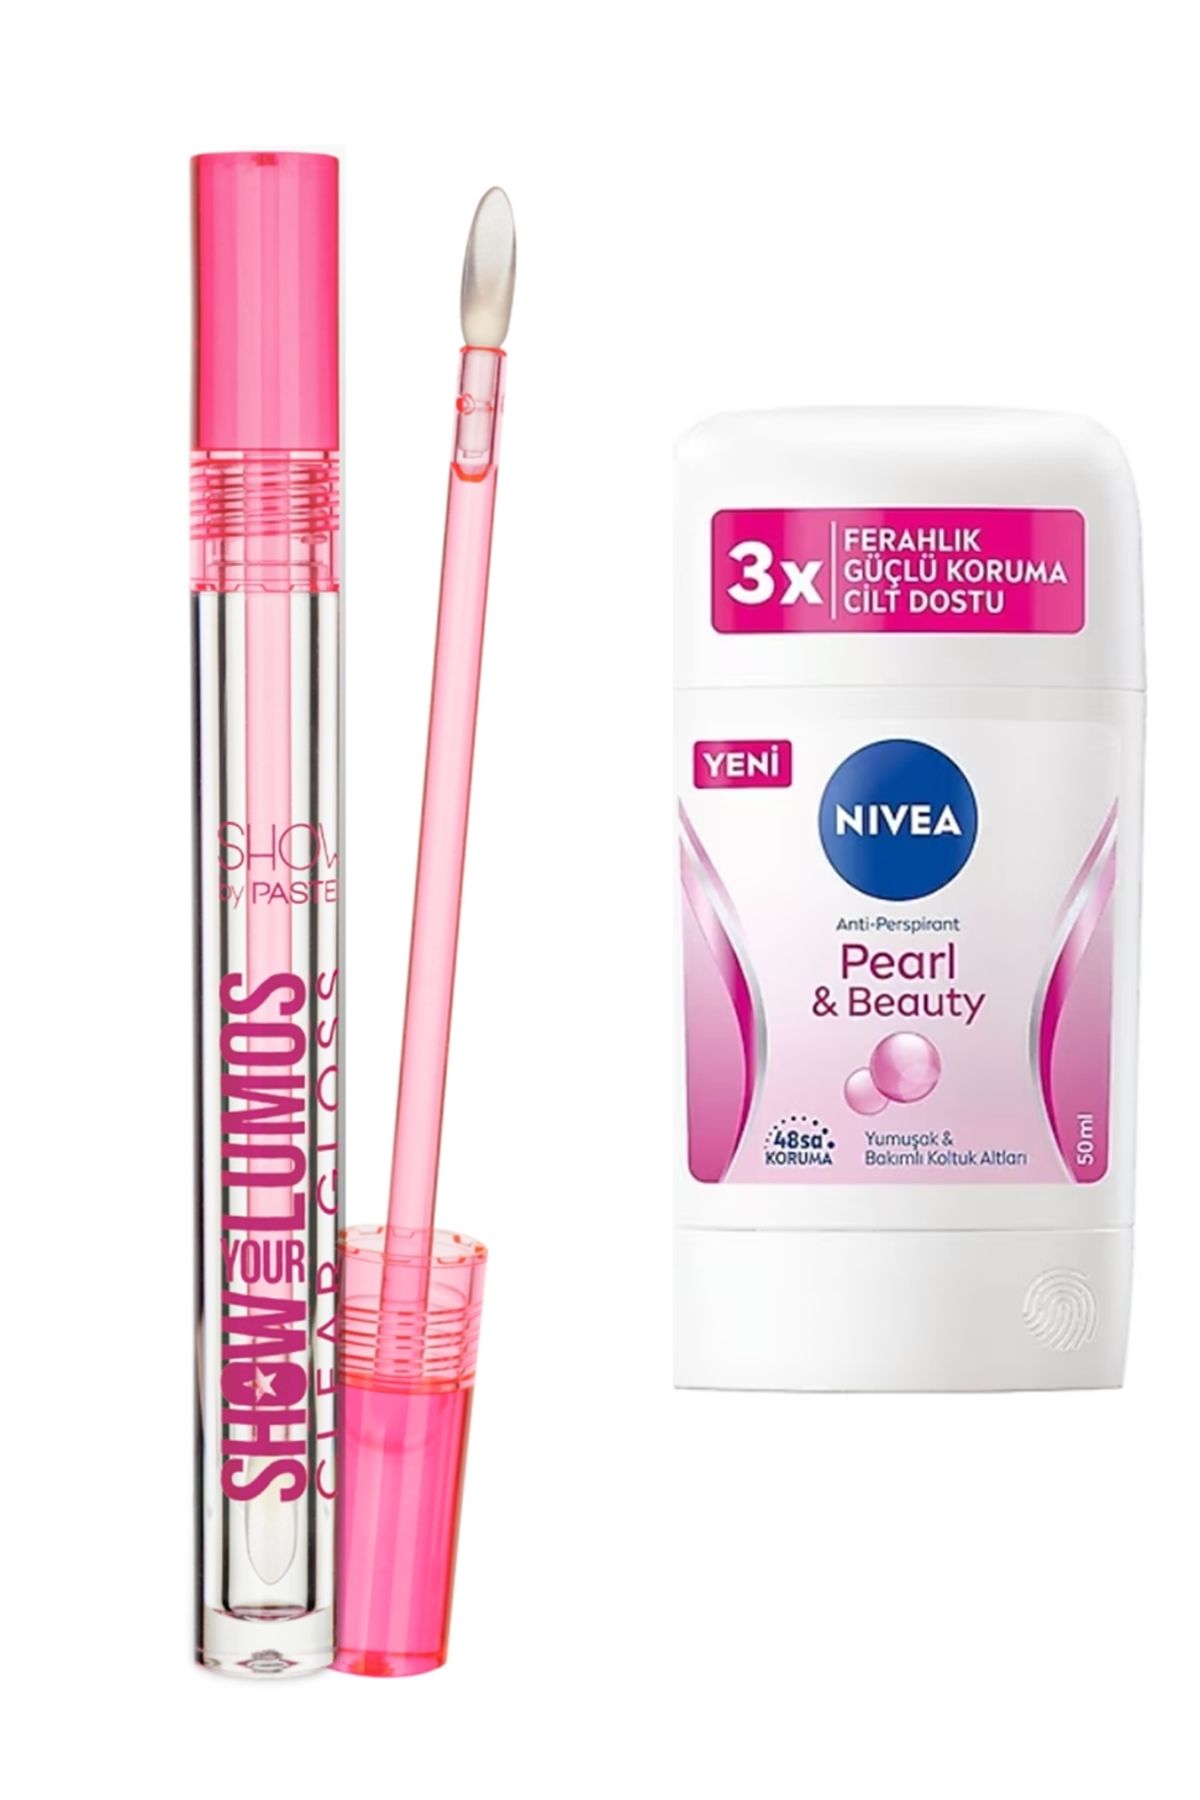 Show by Pastel Pastel Show By Show Your Lumos Clear Gloss +Nivea Pearl & Beauty Kadın Stick Deodorant 50 ml